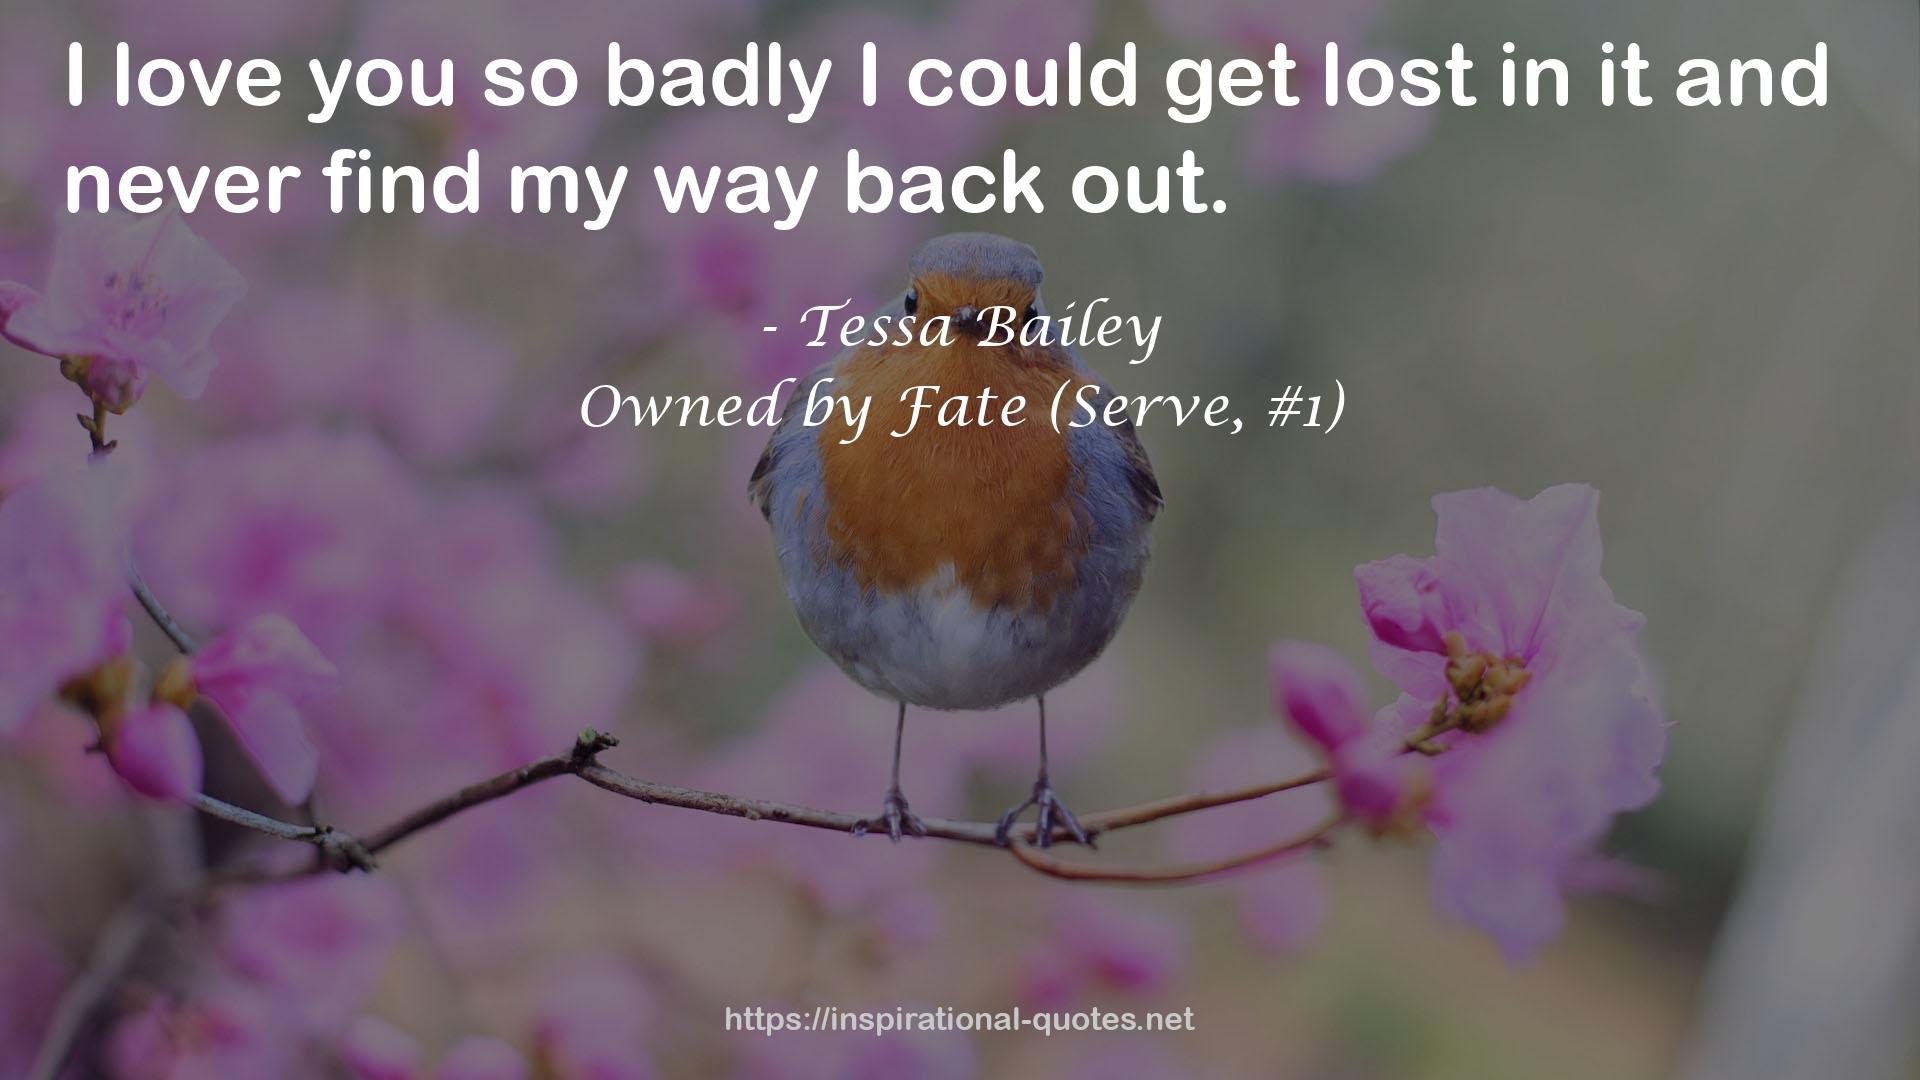 Owned by Fate (Serve, #1) QUOTES